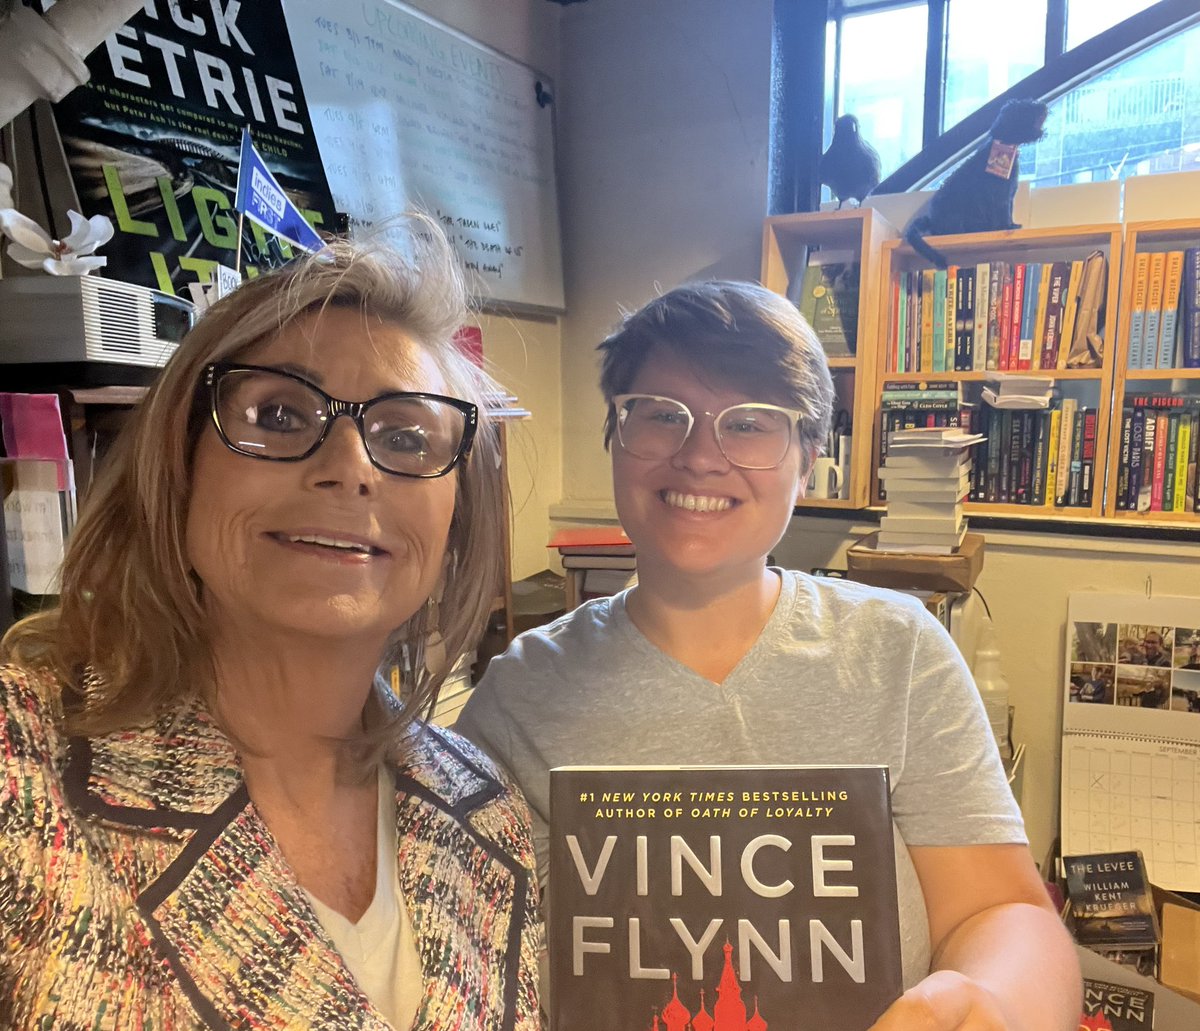 Can you get thrown out of a book store for being toooo excited? @KyleMillsAuthor @VinceFlynncom @bentleydonb @ThrillerPodcast @MitchRappFans @AtriaMysteryBus #MitchRappisback
#MitchRappAmbassador